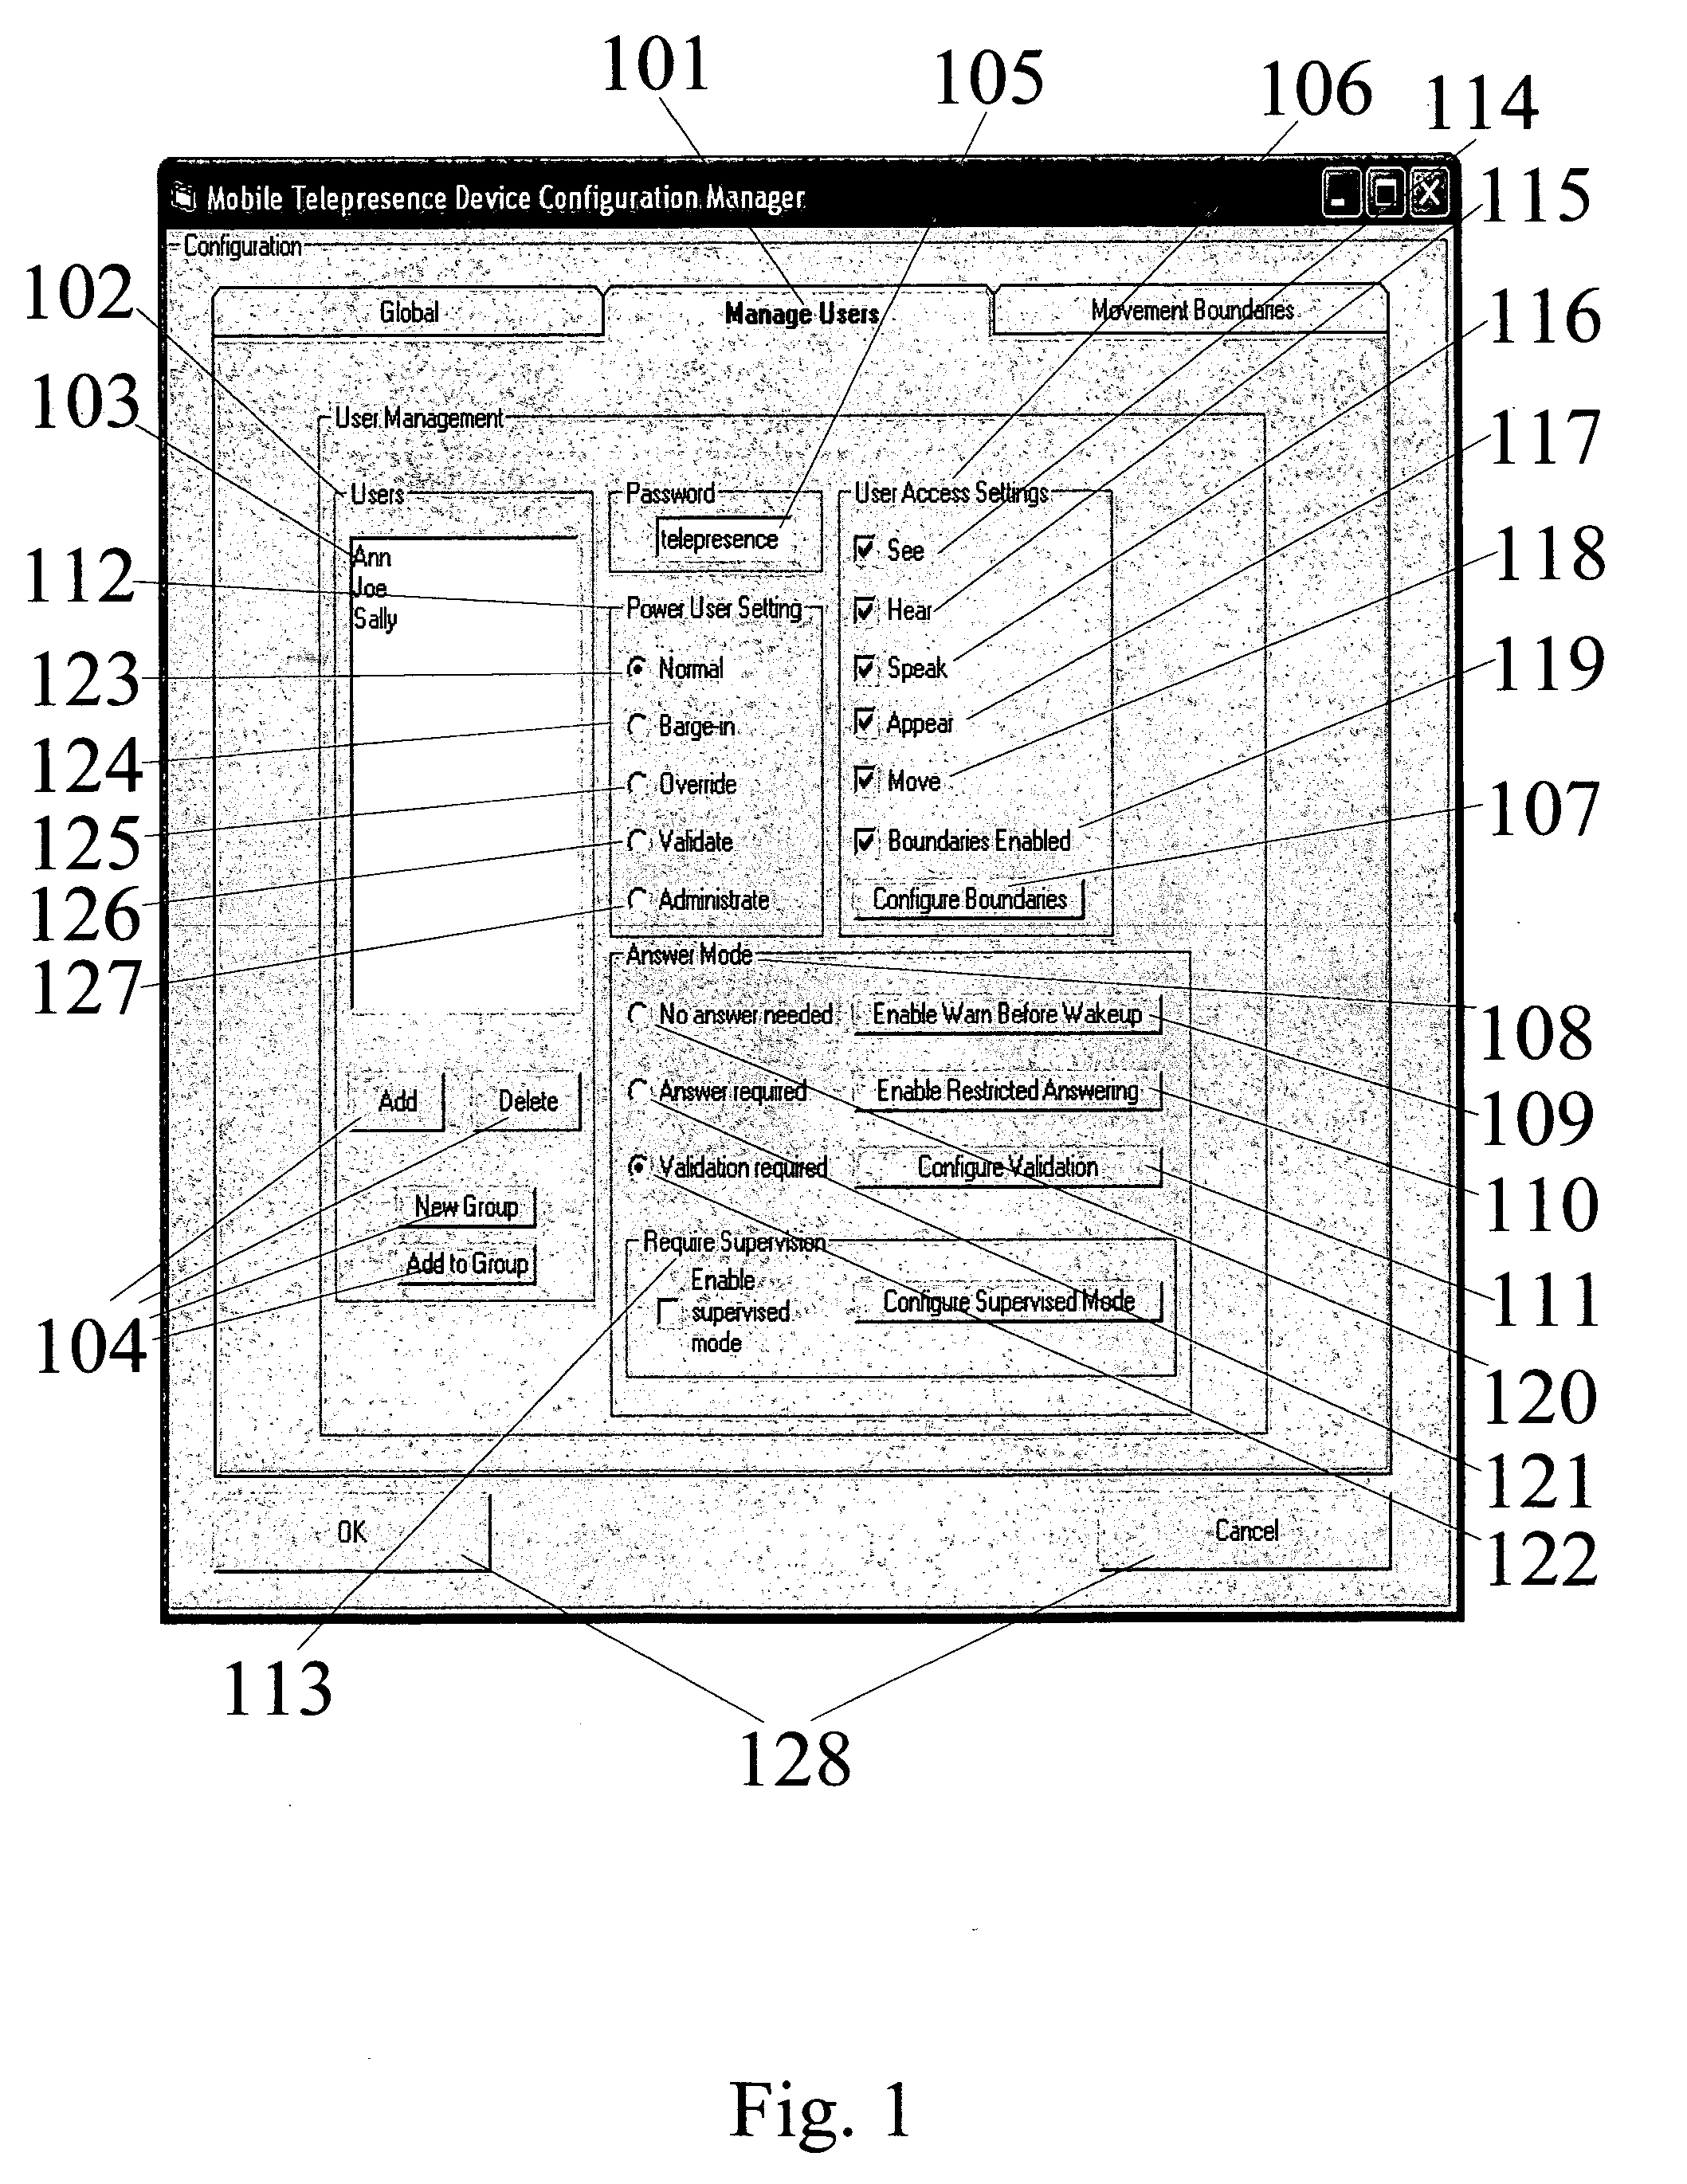 Mobile video teleconferencing authentication and management system and method